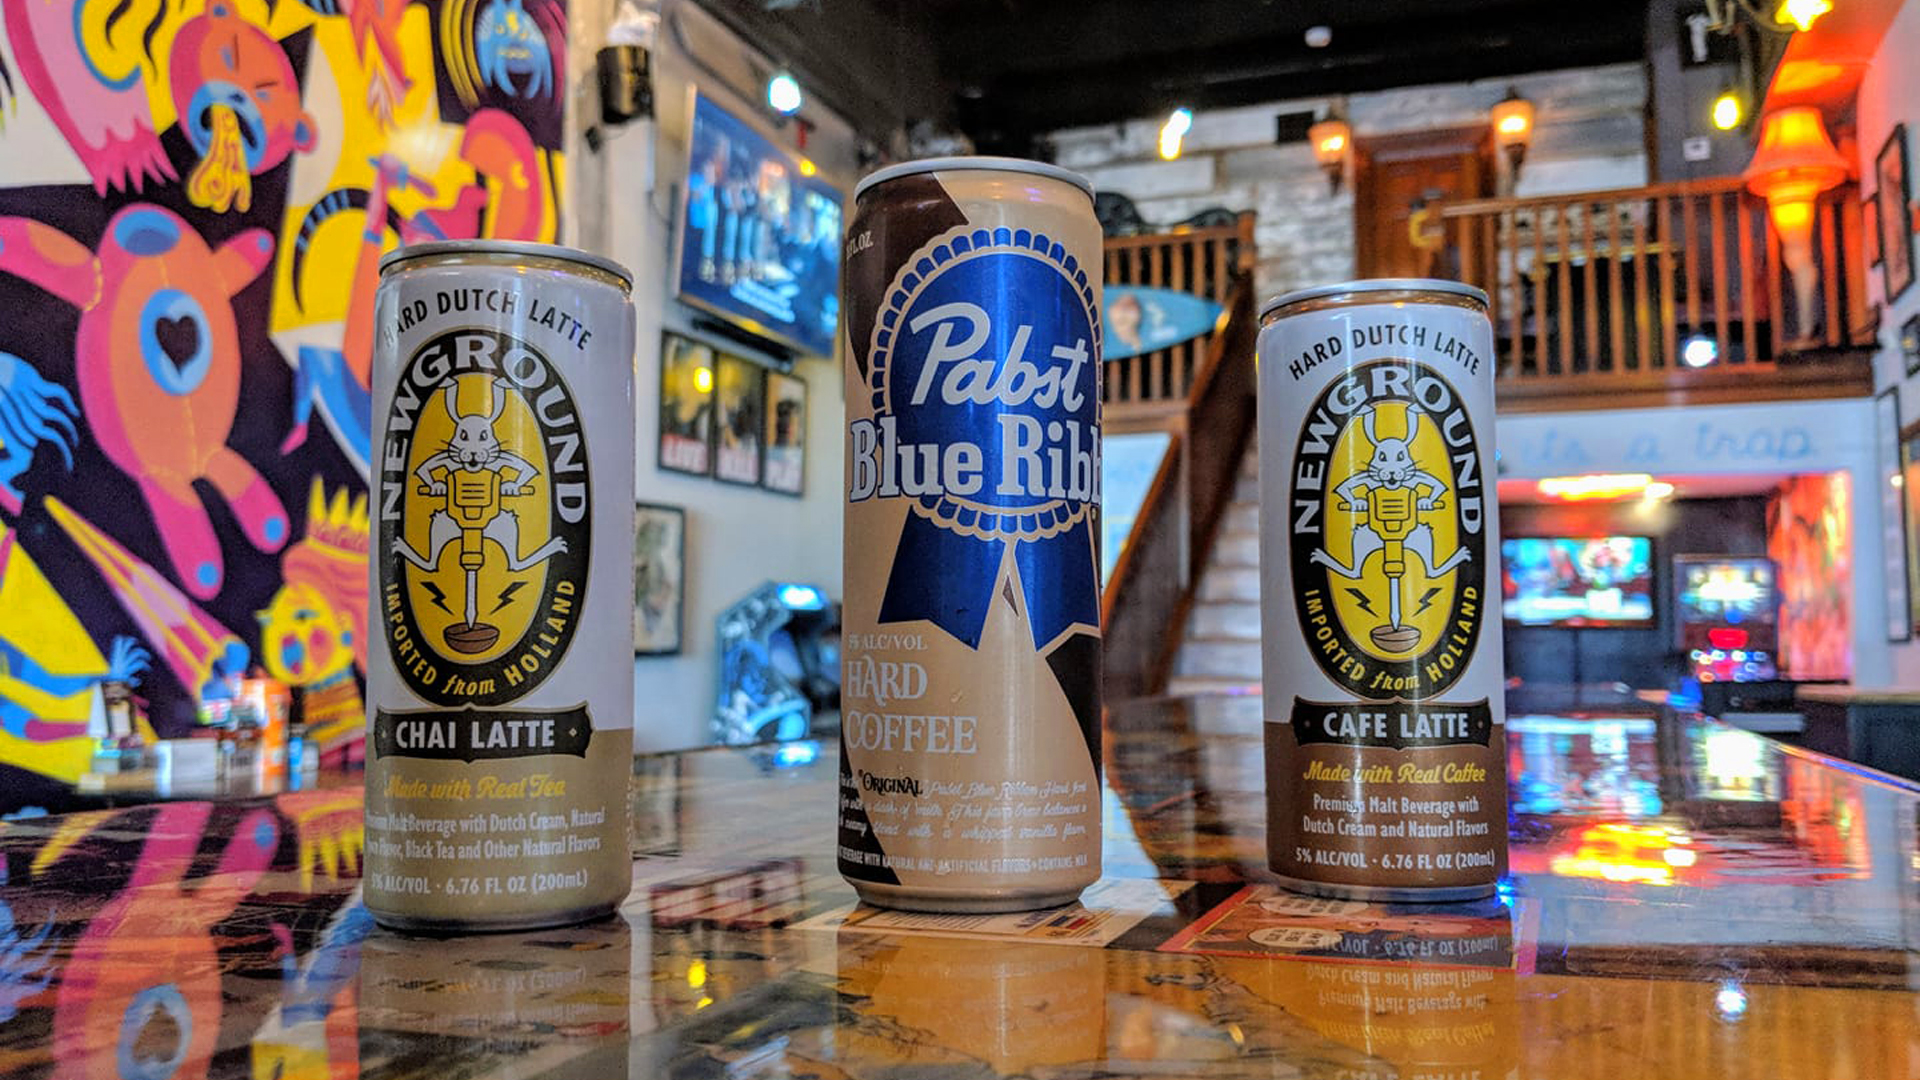 Beer cans from Retro room in Key West